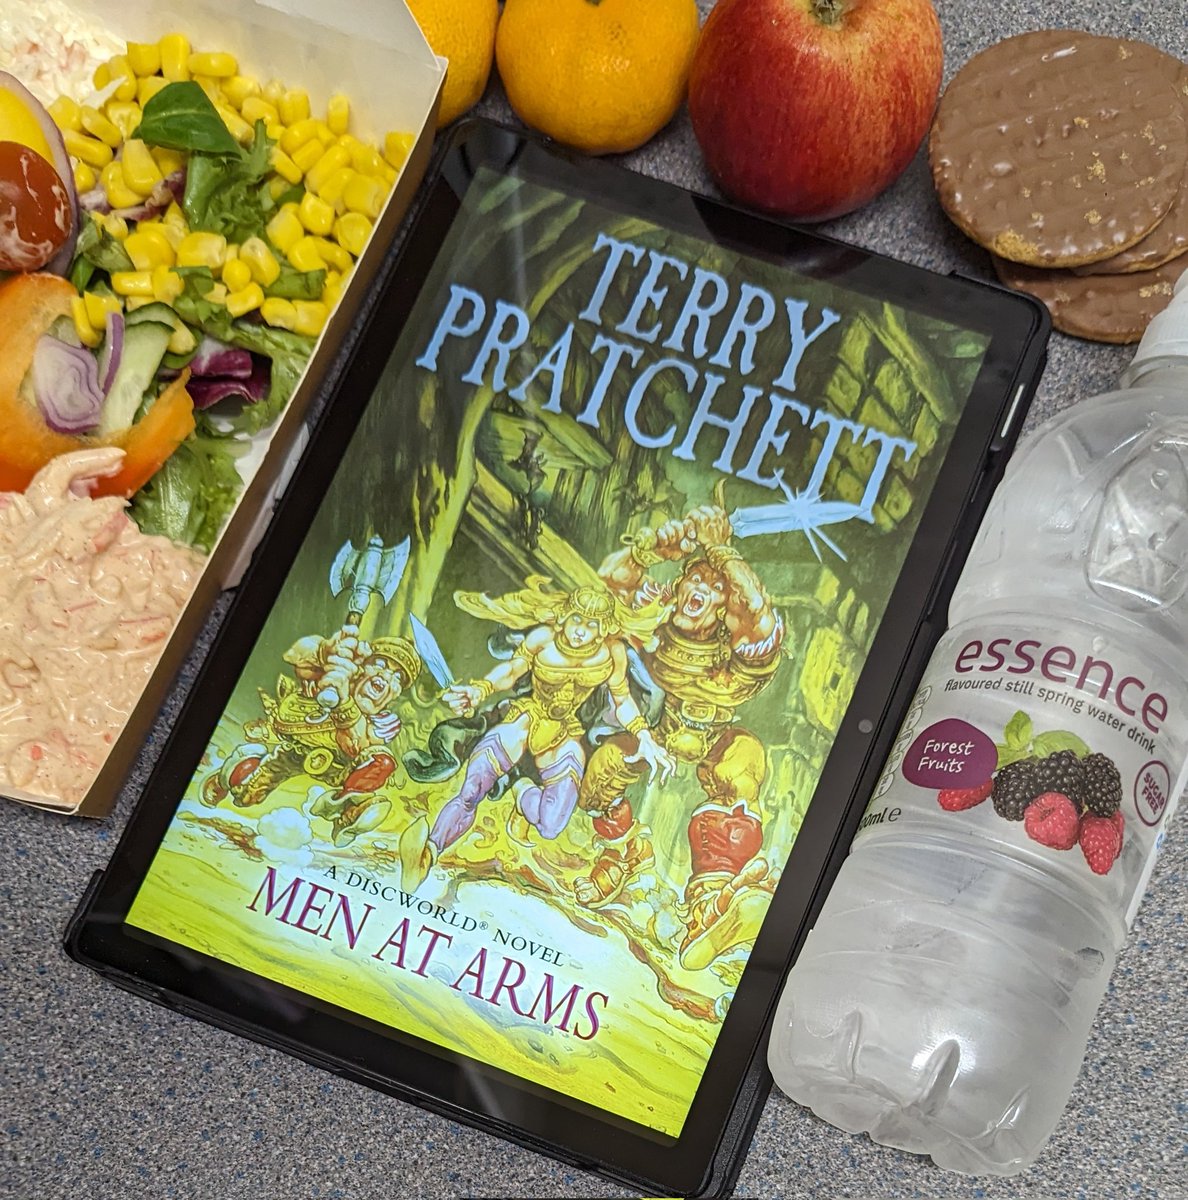 Back from holiday, back to #LunchtimeReading and back to the #GreatPratchettReread and the return of the #Discworld and The Watch in Men At Arms!

#Bookstagram #TerryPratchett #MenAtArms #WritingCommunity